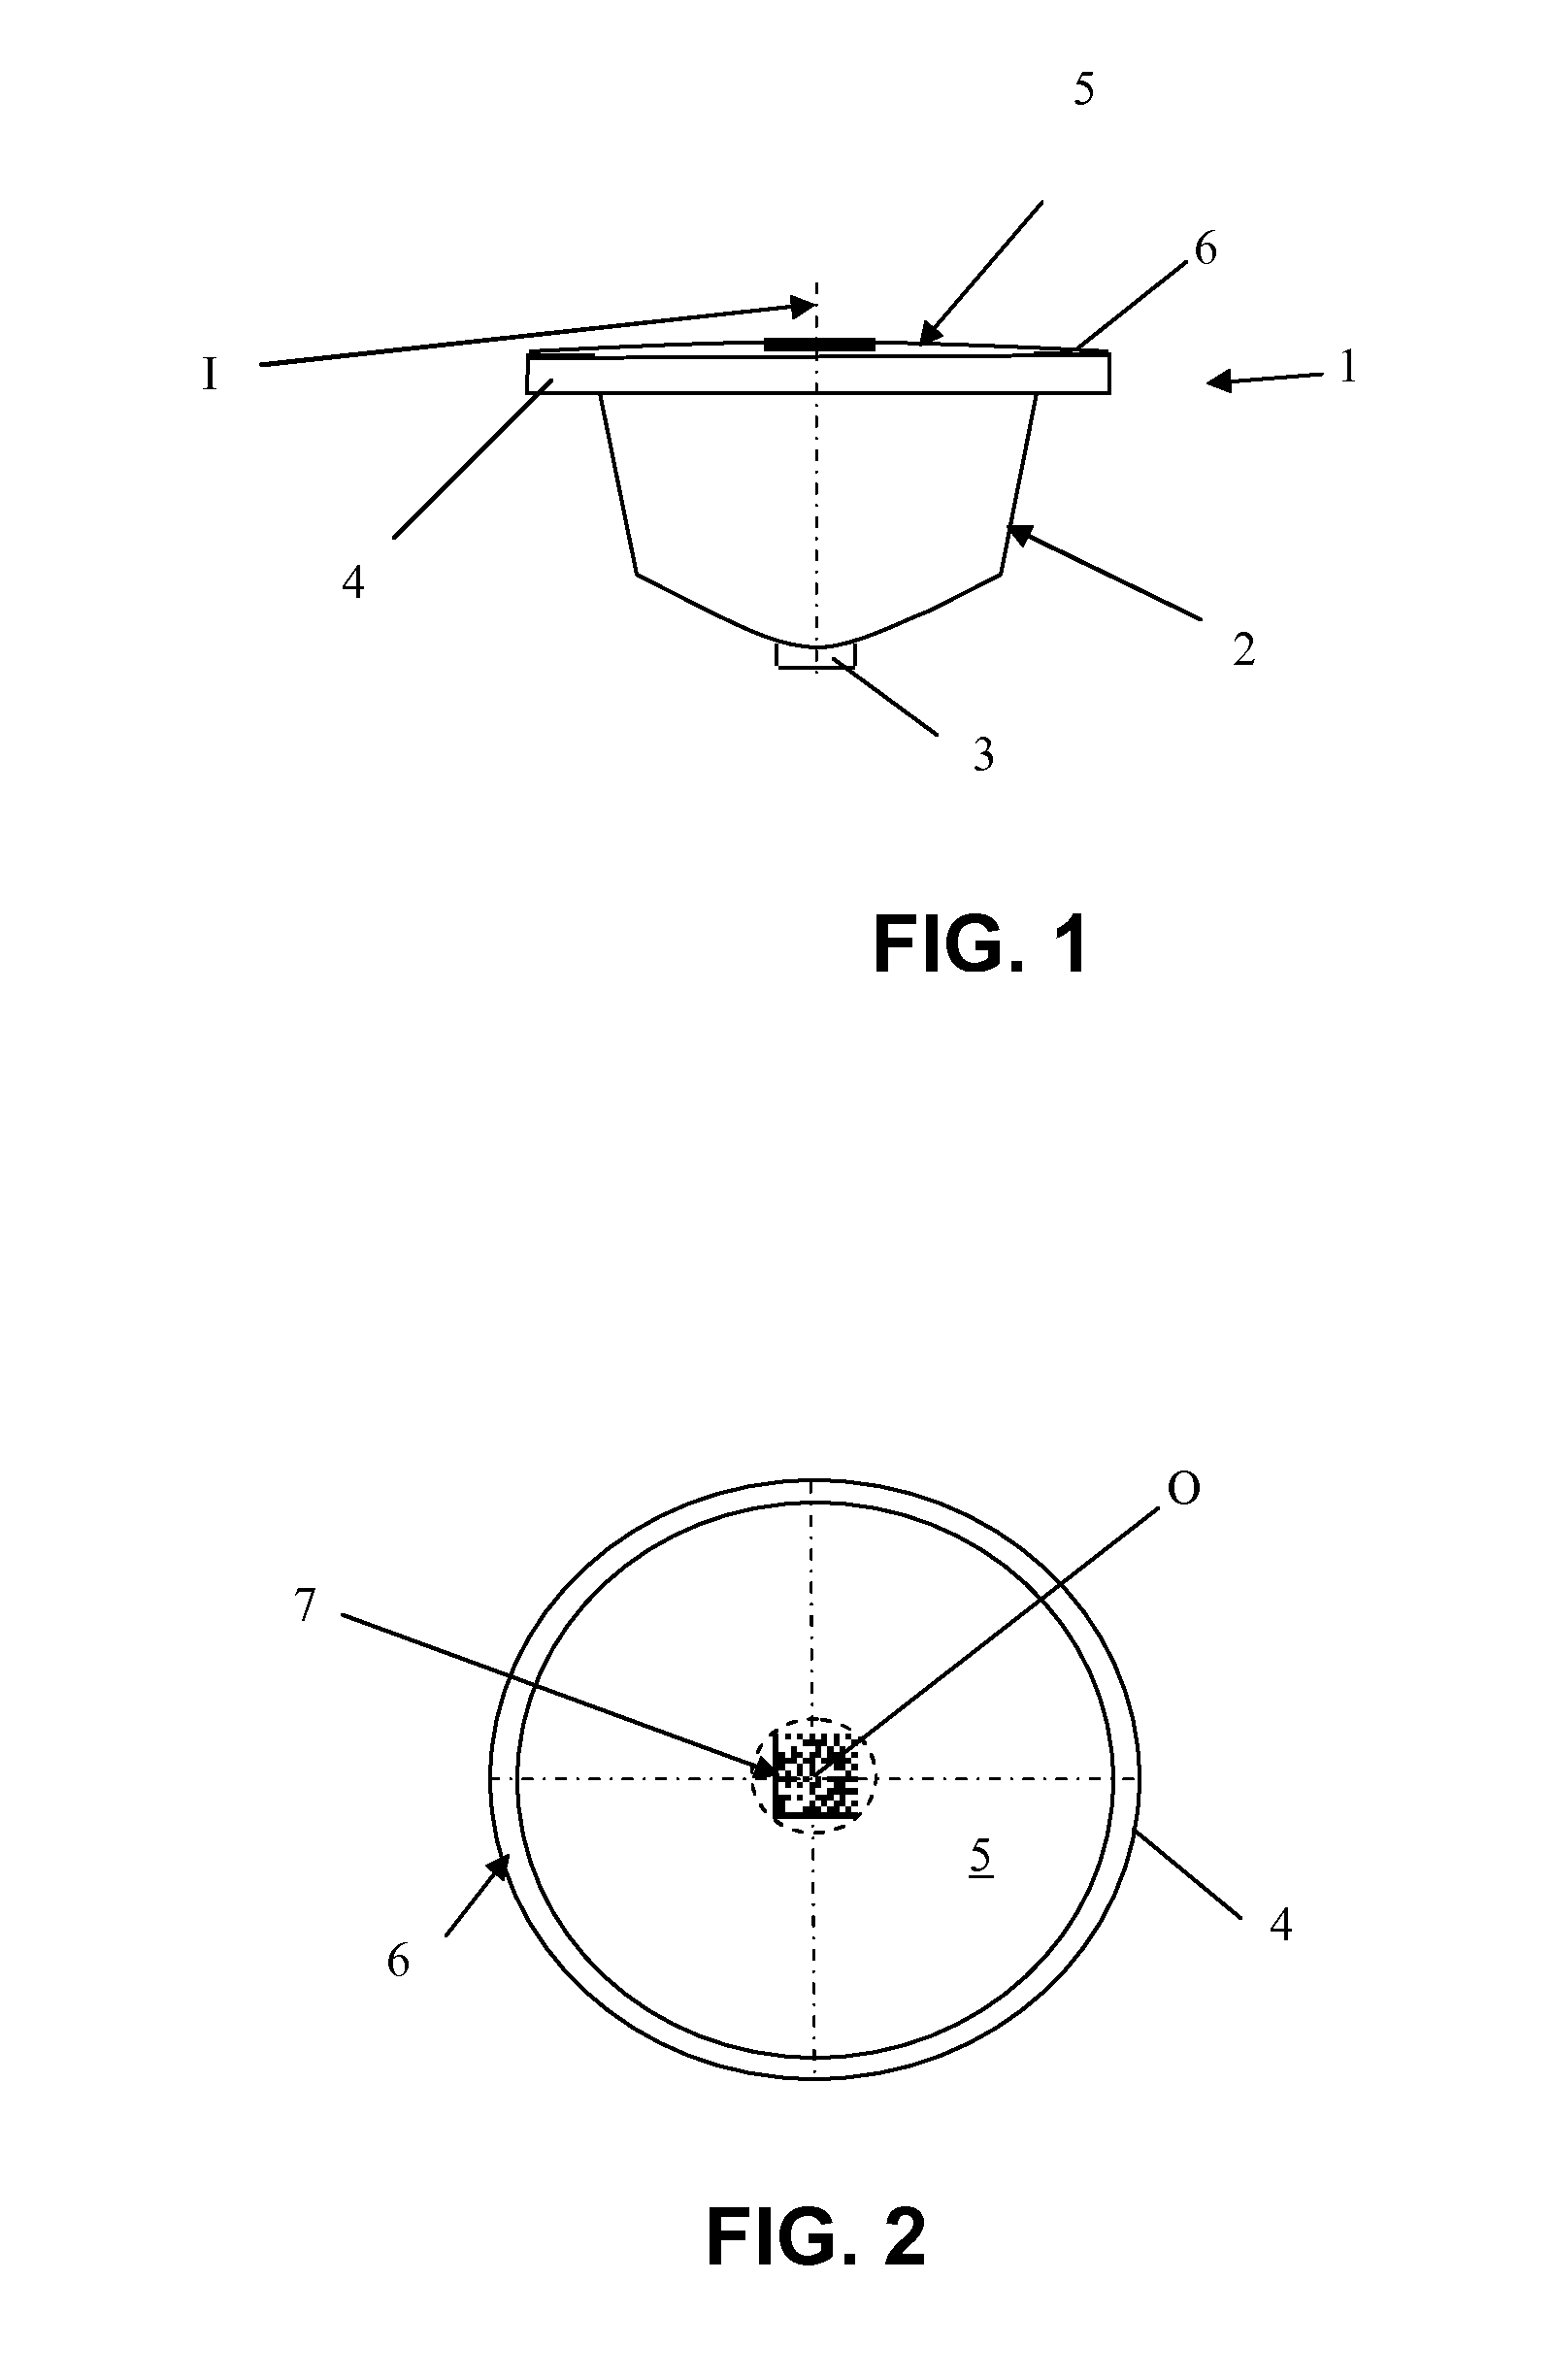 Method for providing information to a user from a capsule for the preparation of a beverage using a code